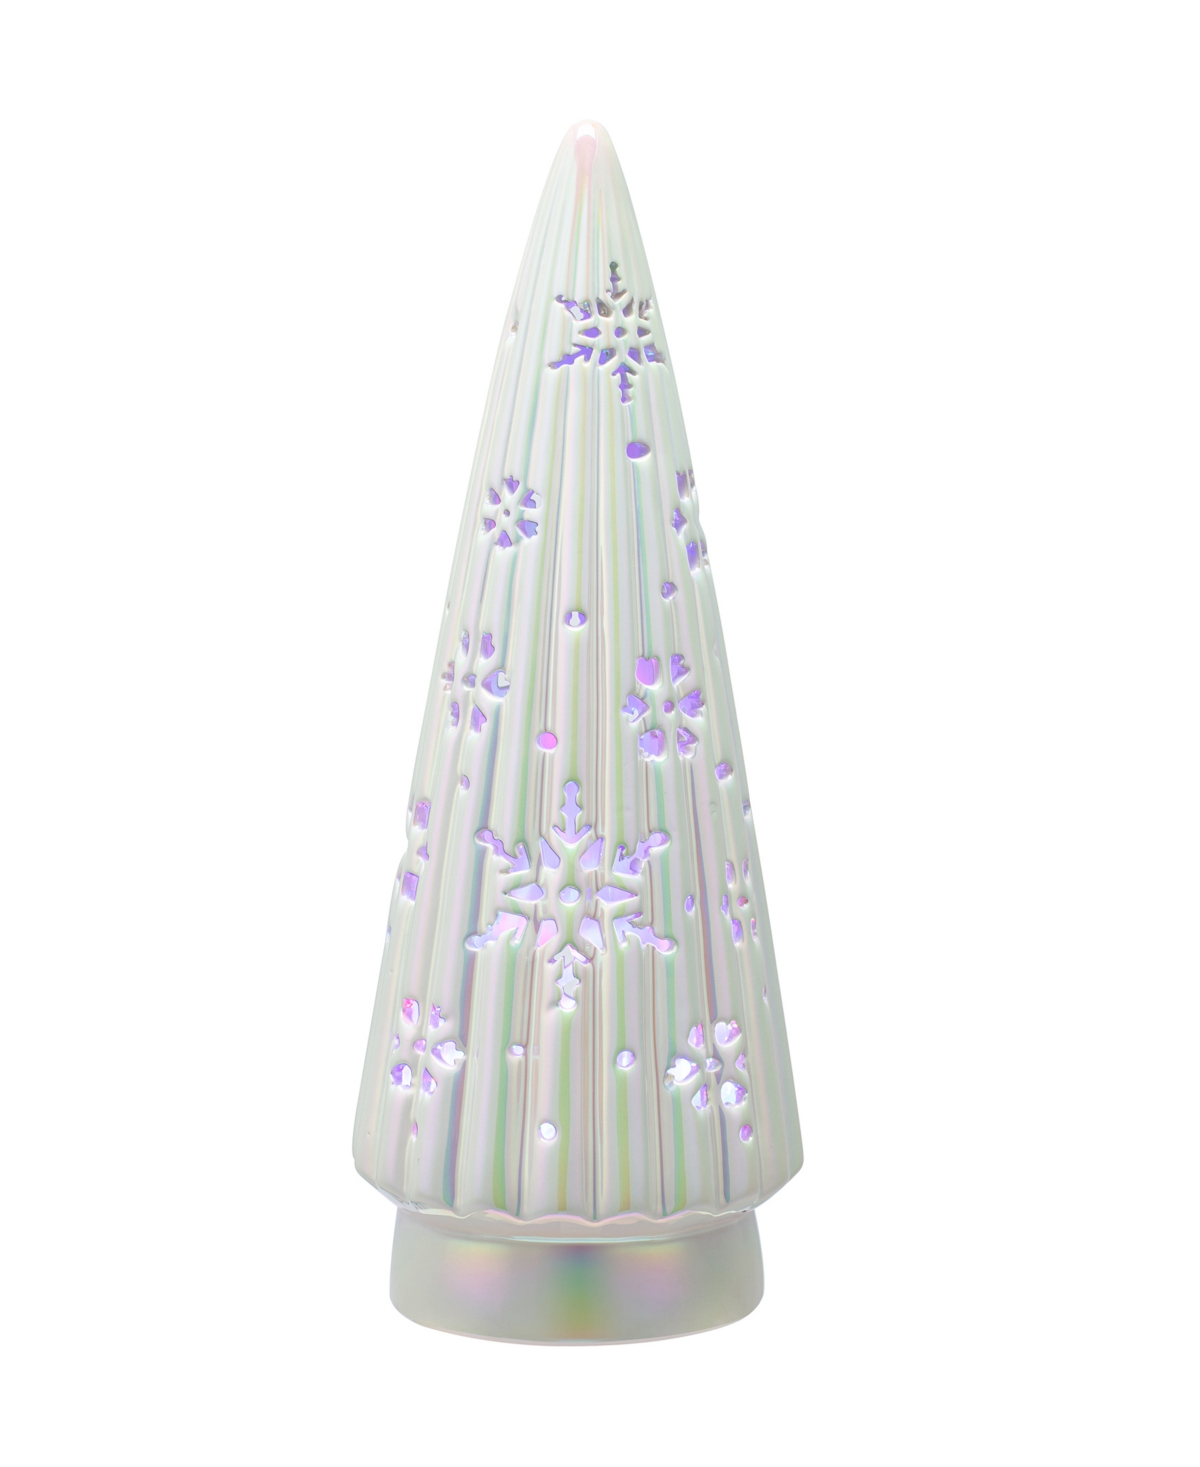 Mr. Christmas 90th Anniversary Collection 16" Lit Kaleidoscope Tree In Multi